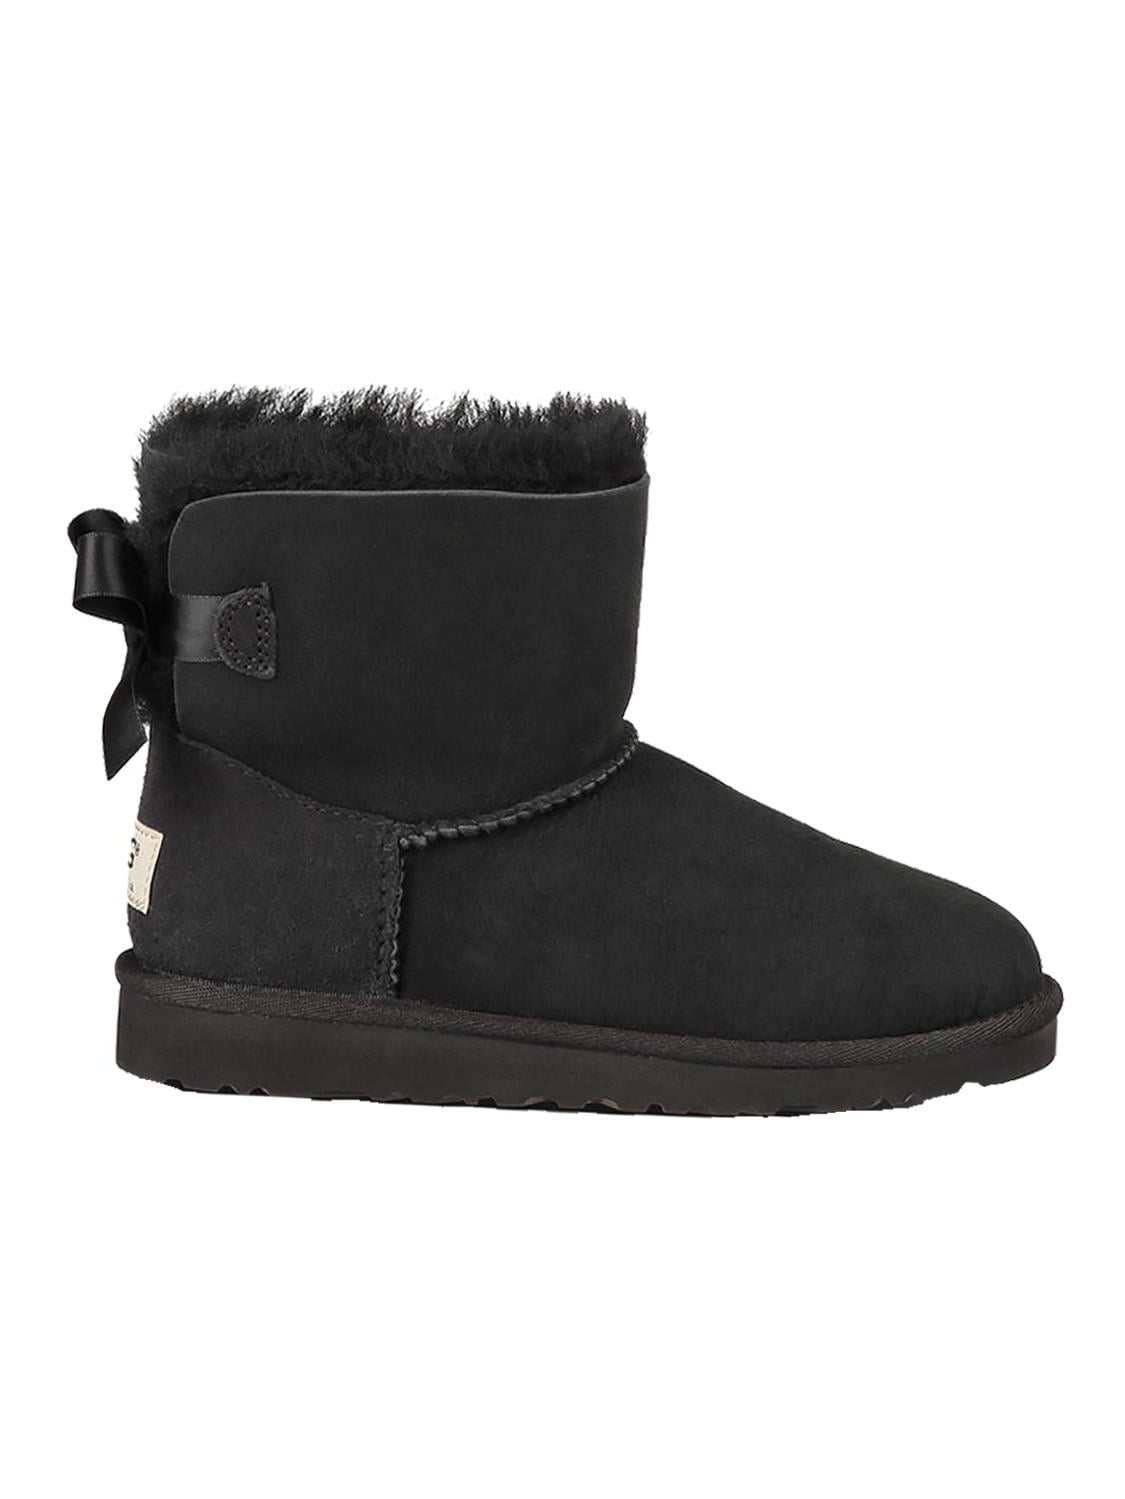 all black uggs with bows